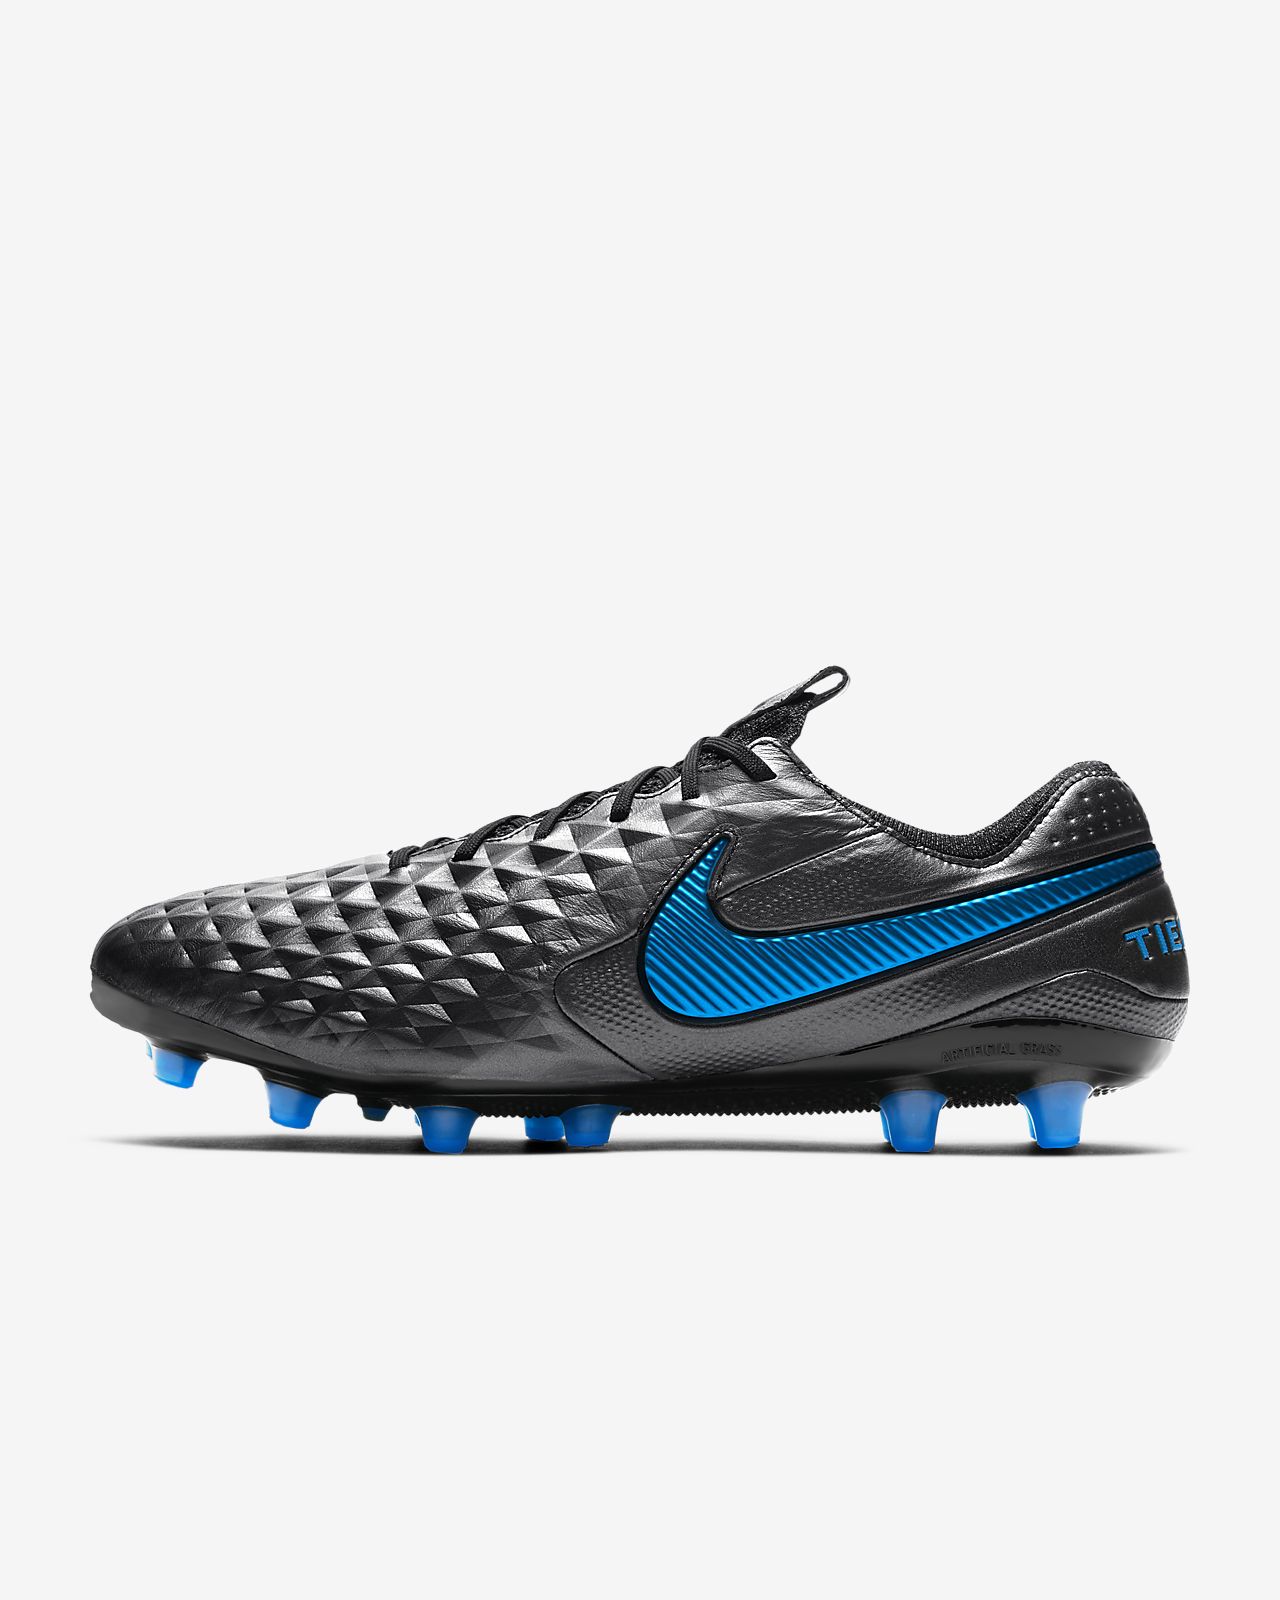 Nike Tiempo Legend 8 Elite AG-PRO Artificial-Grass Football Boot. Nike AT